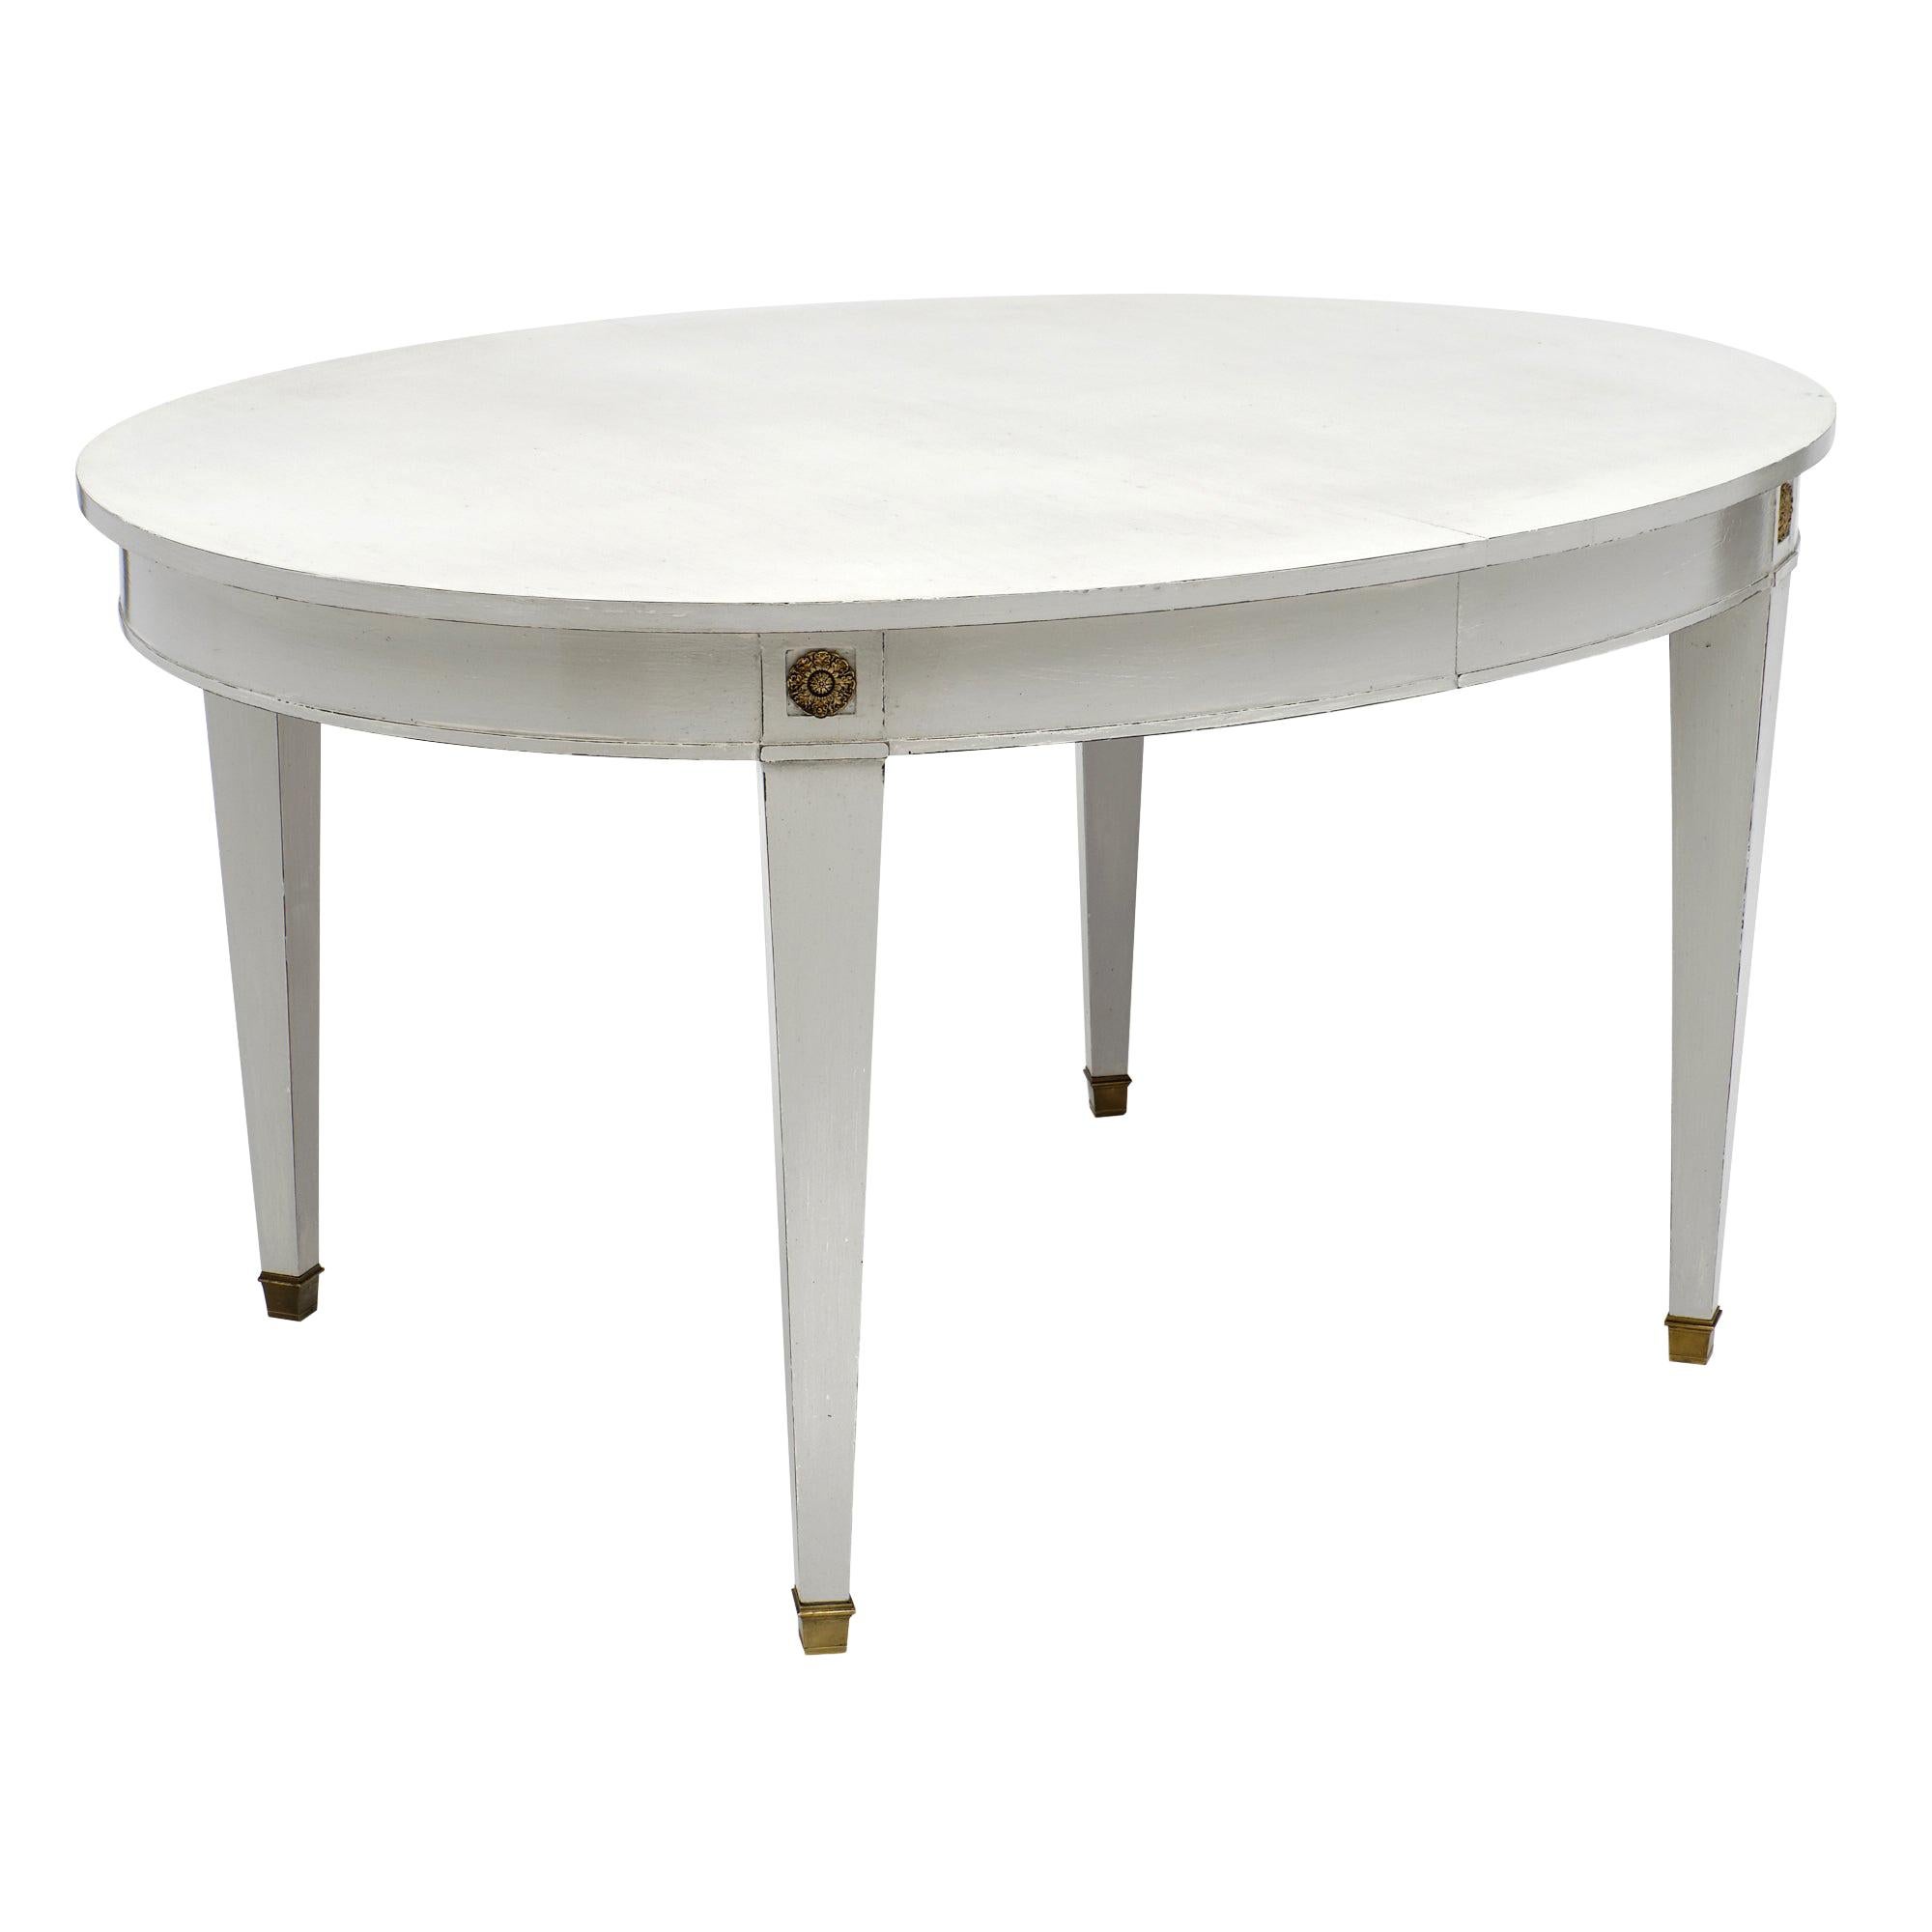 Painted Directoire Style Dining Table